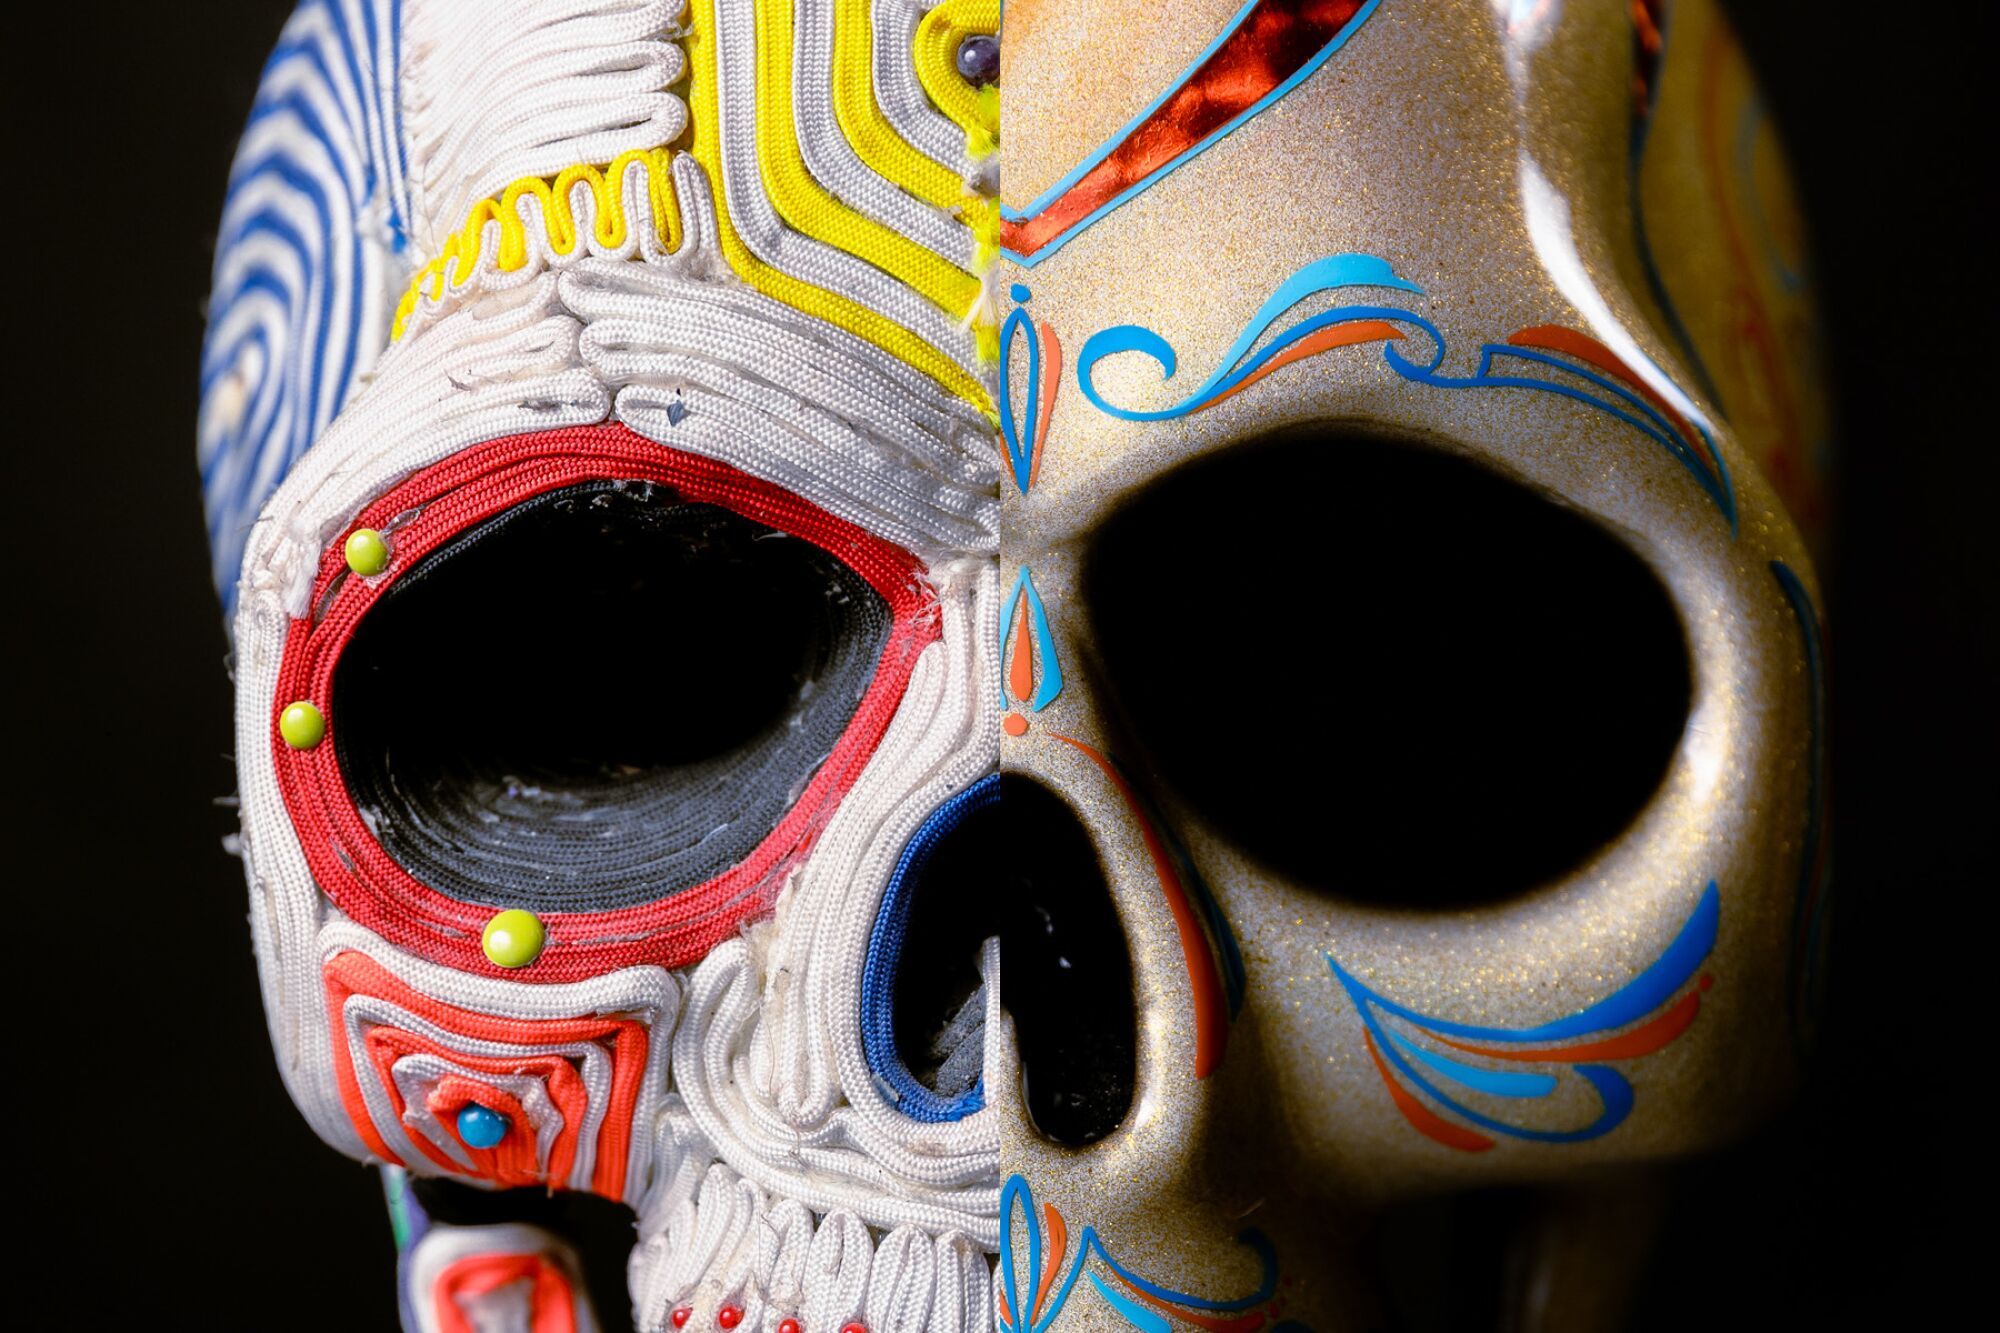 A skull mask made up of spliced photos of two different masks, one covered in fabric cording and one painted gold.